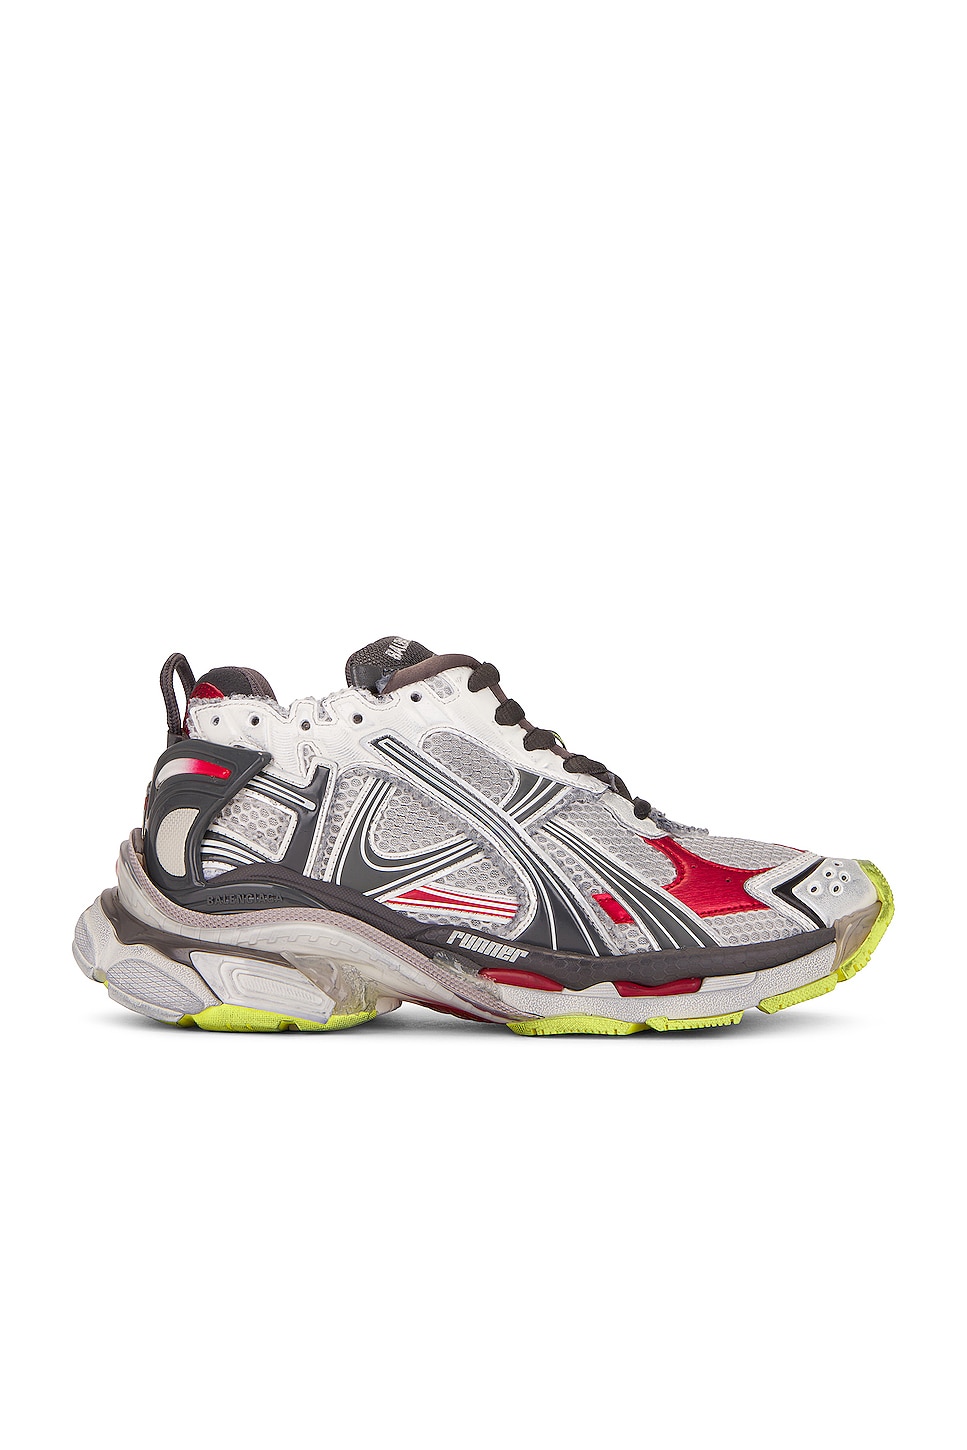 Image 1 of Balenciaga Runner in Blk, Whi, Red, & Fluo Yel